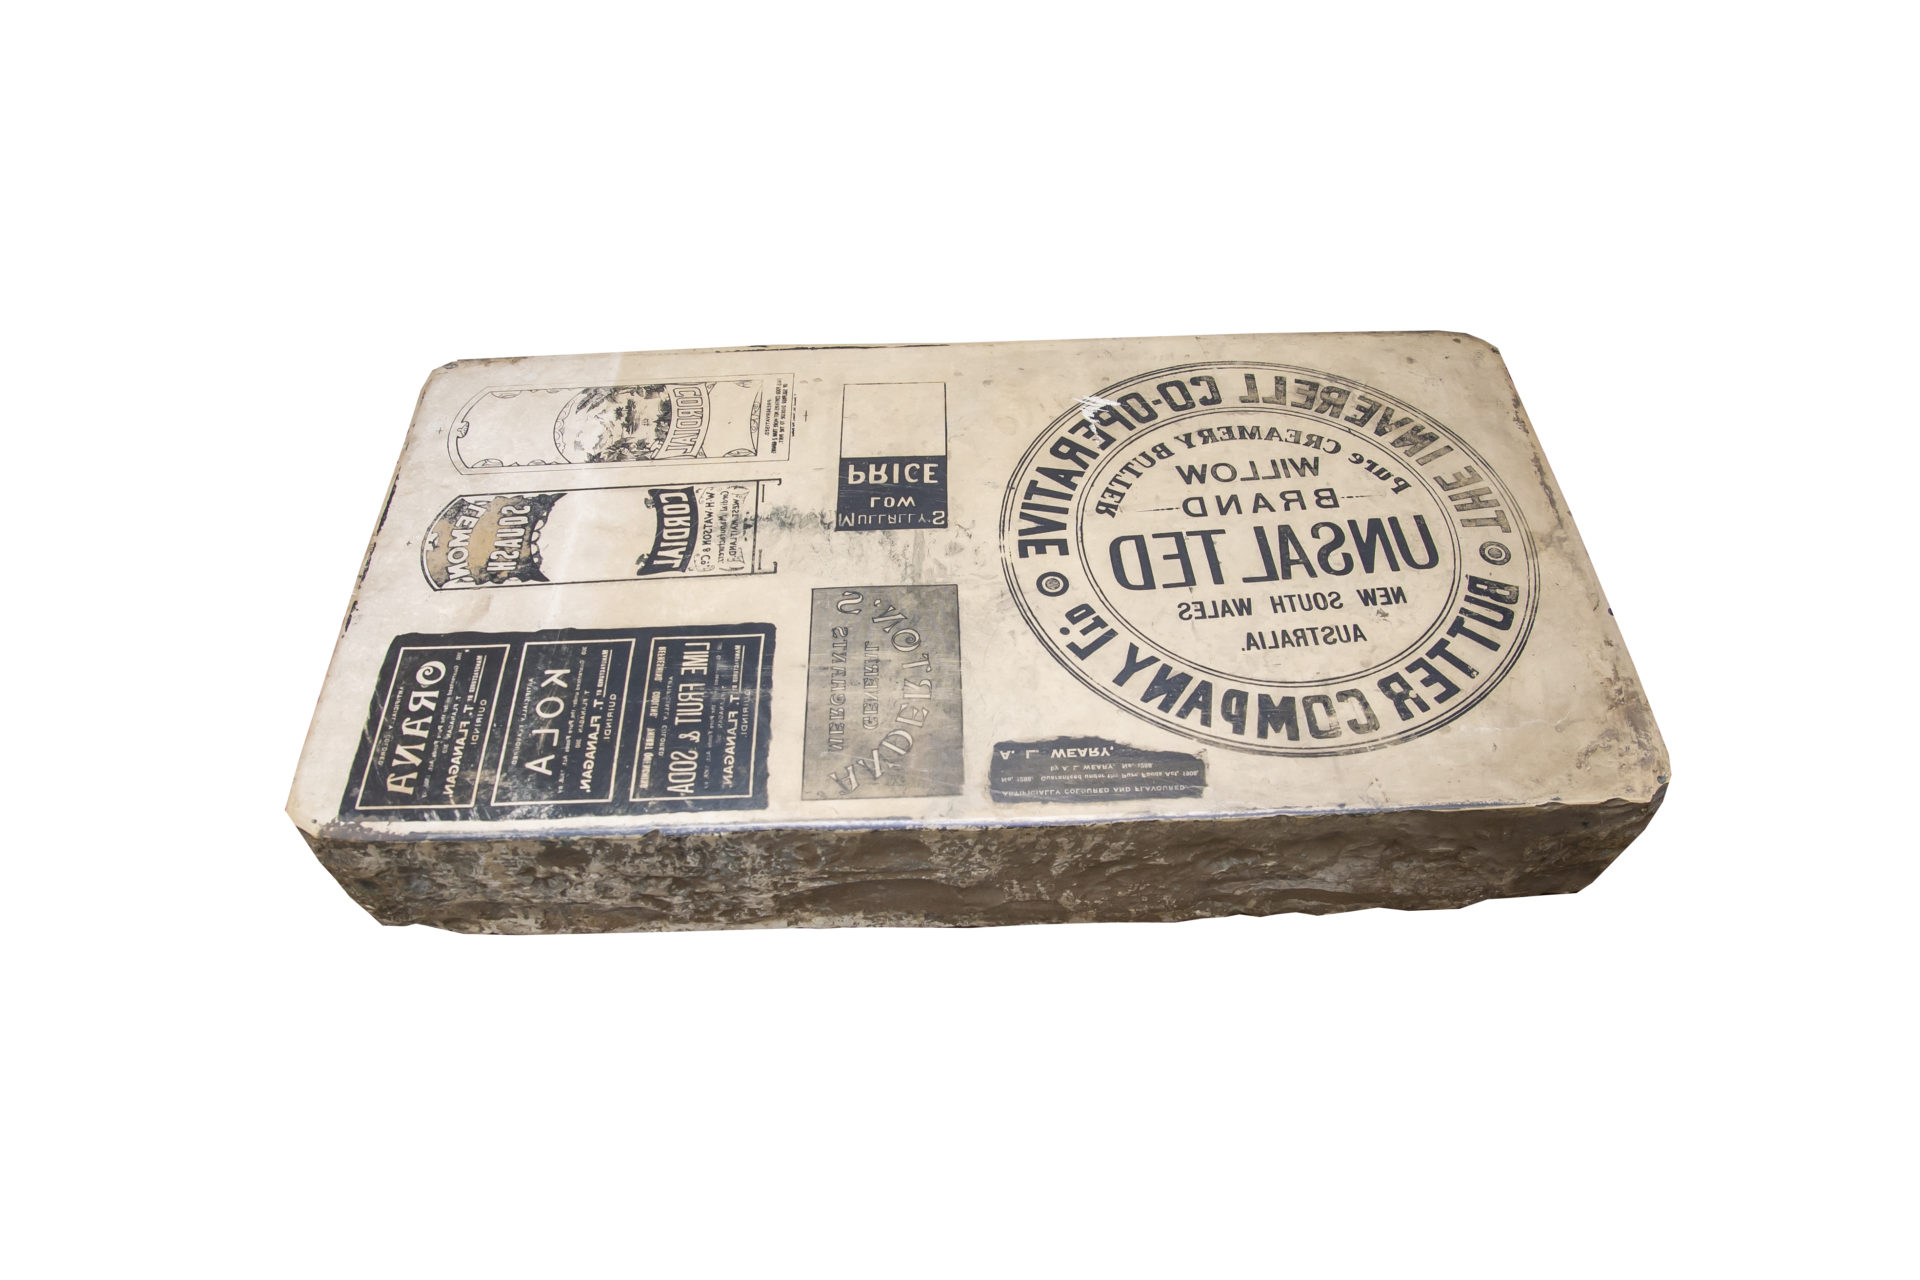 Slab of stone engraved with advertising graphics